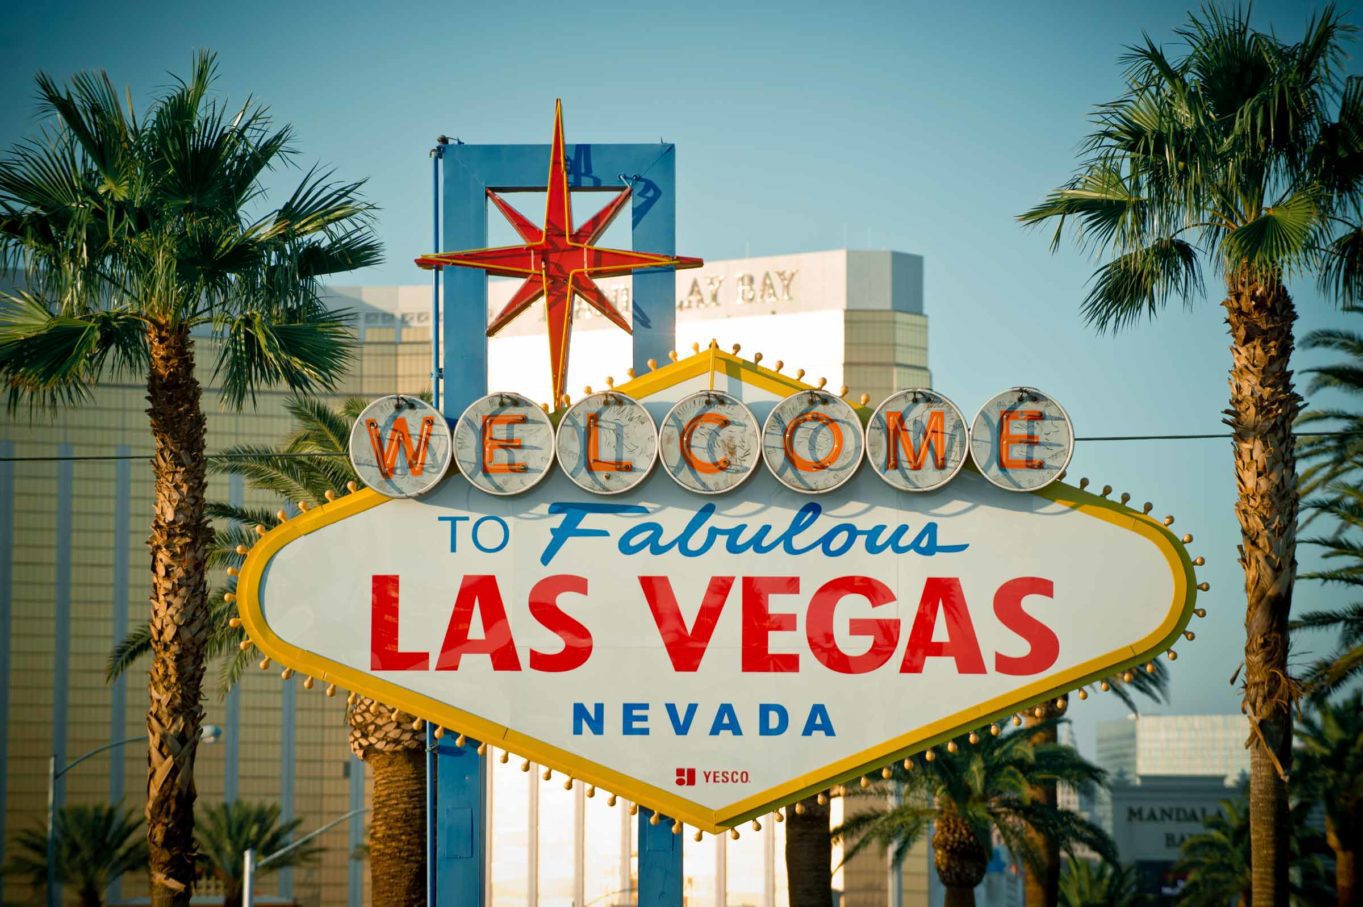 Las Vegas gluten-free travel guide-what to do, where to eat, drink, sleep